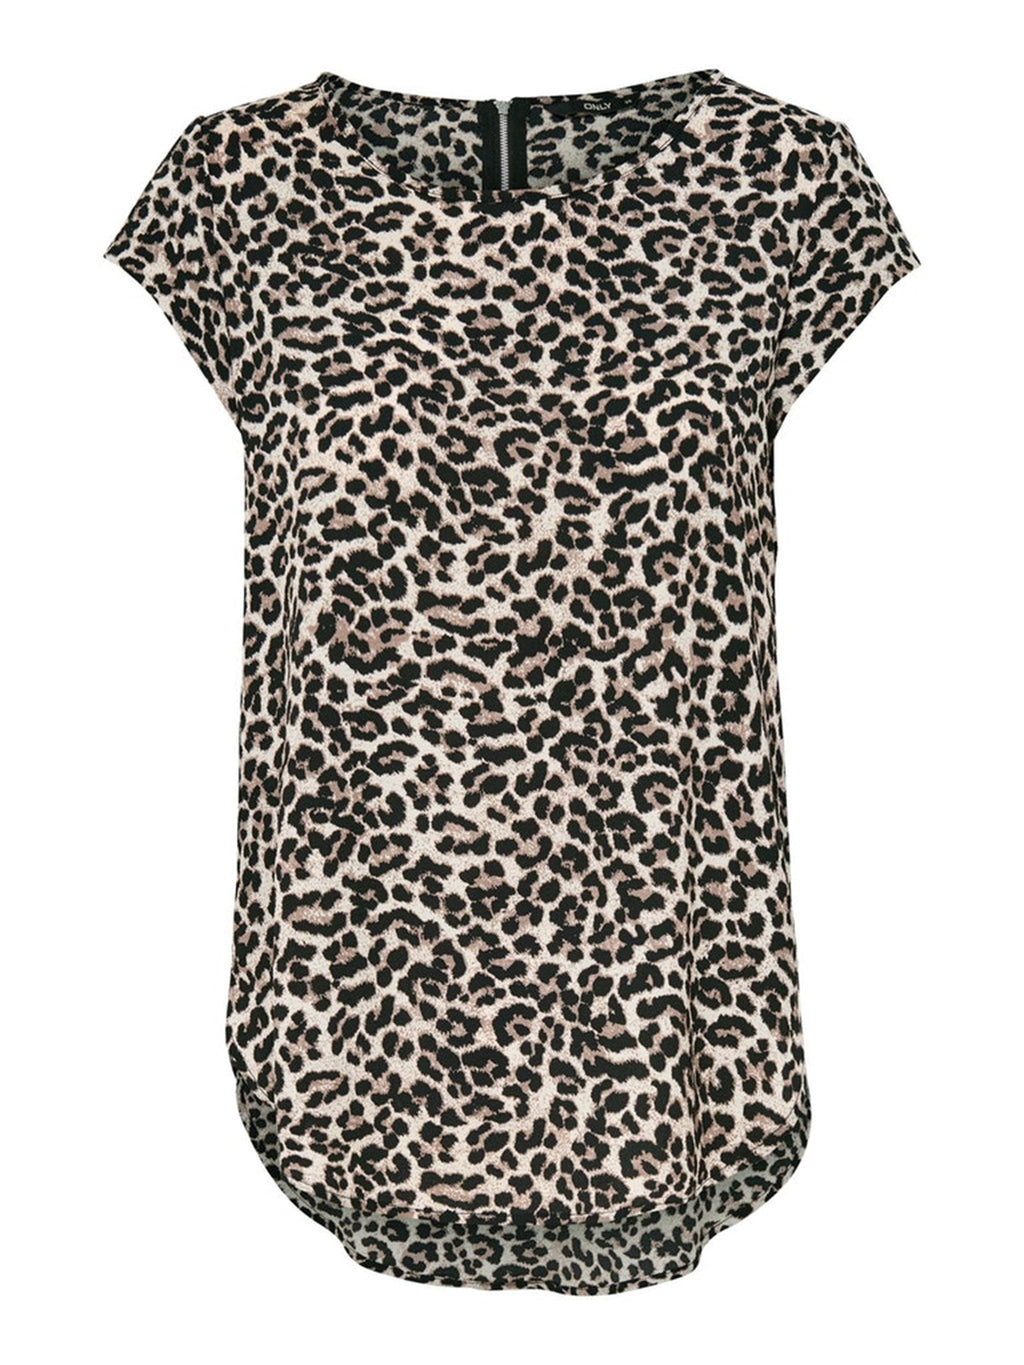 Vic Top with Print - Pumice Stone